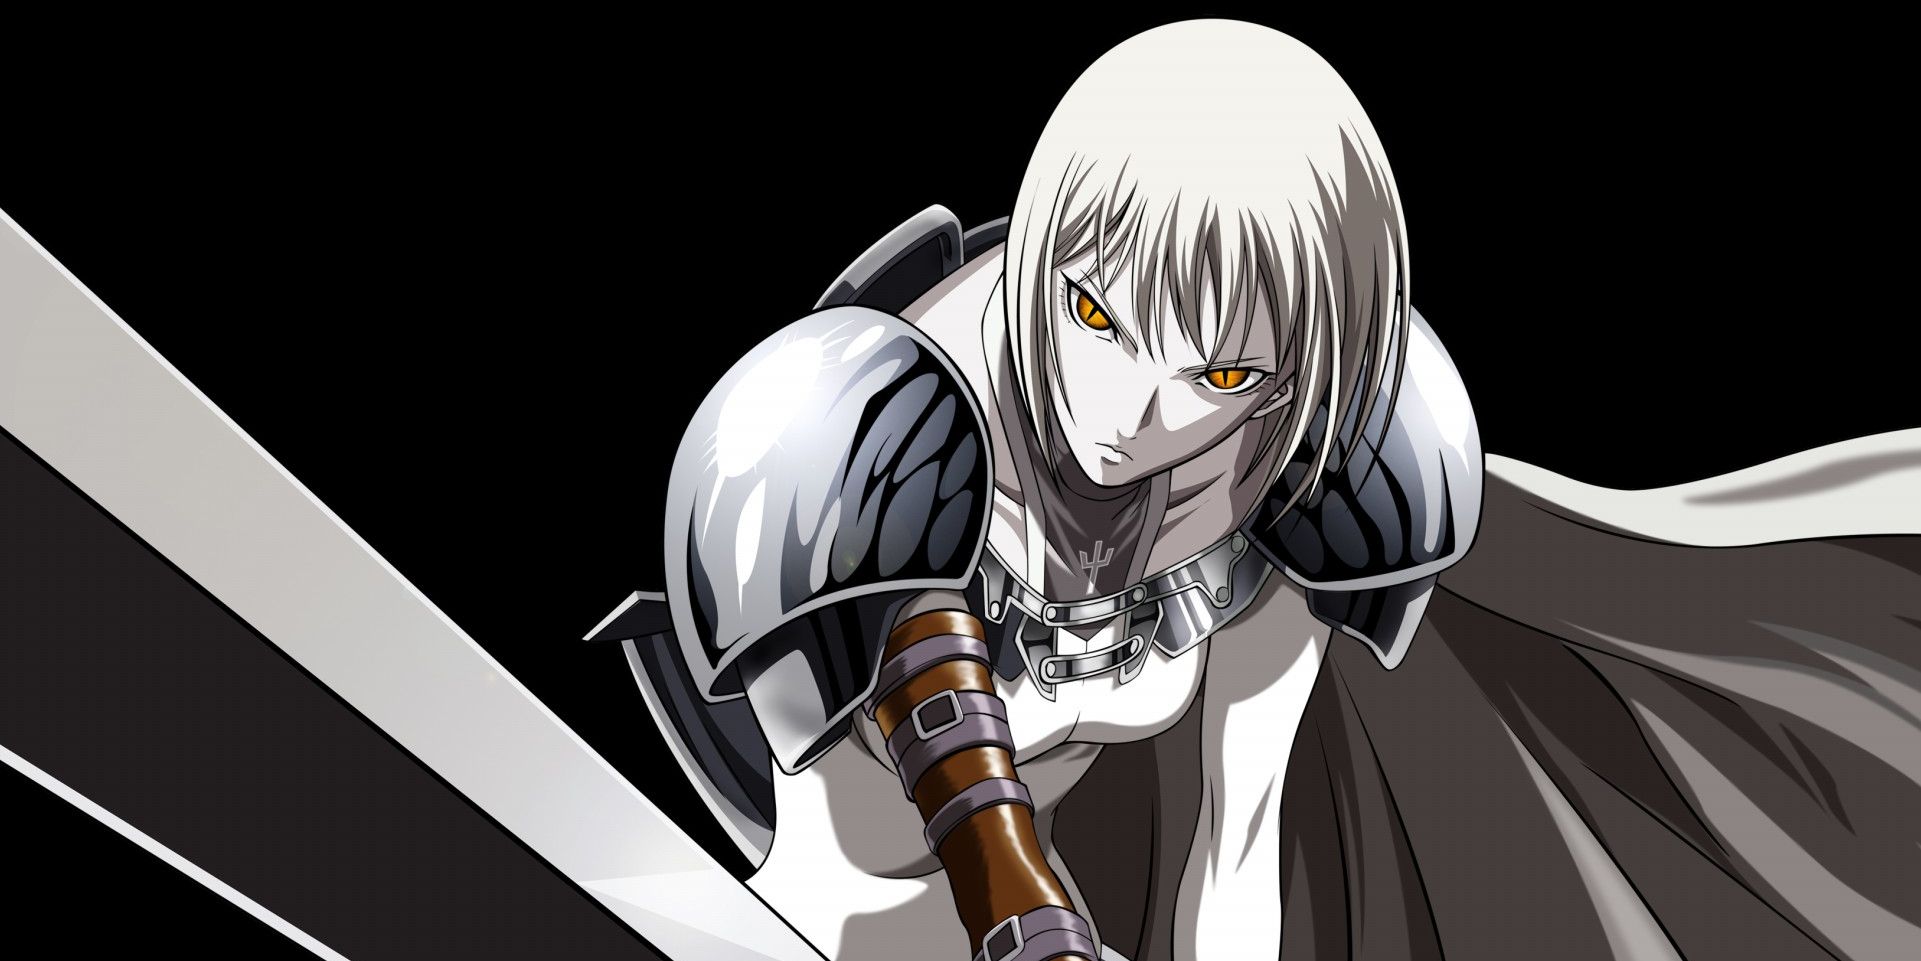 the main character from the claymore manga